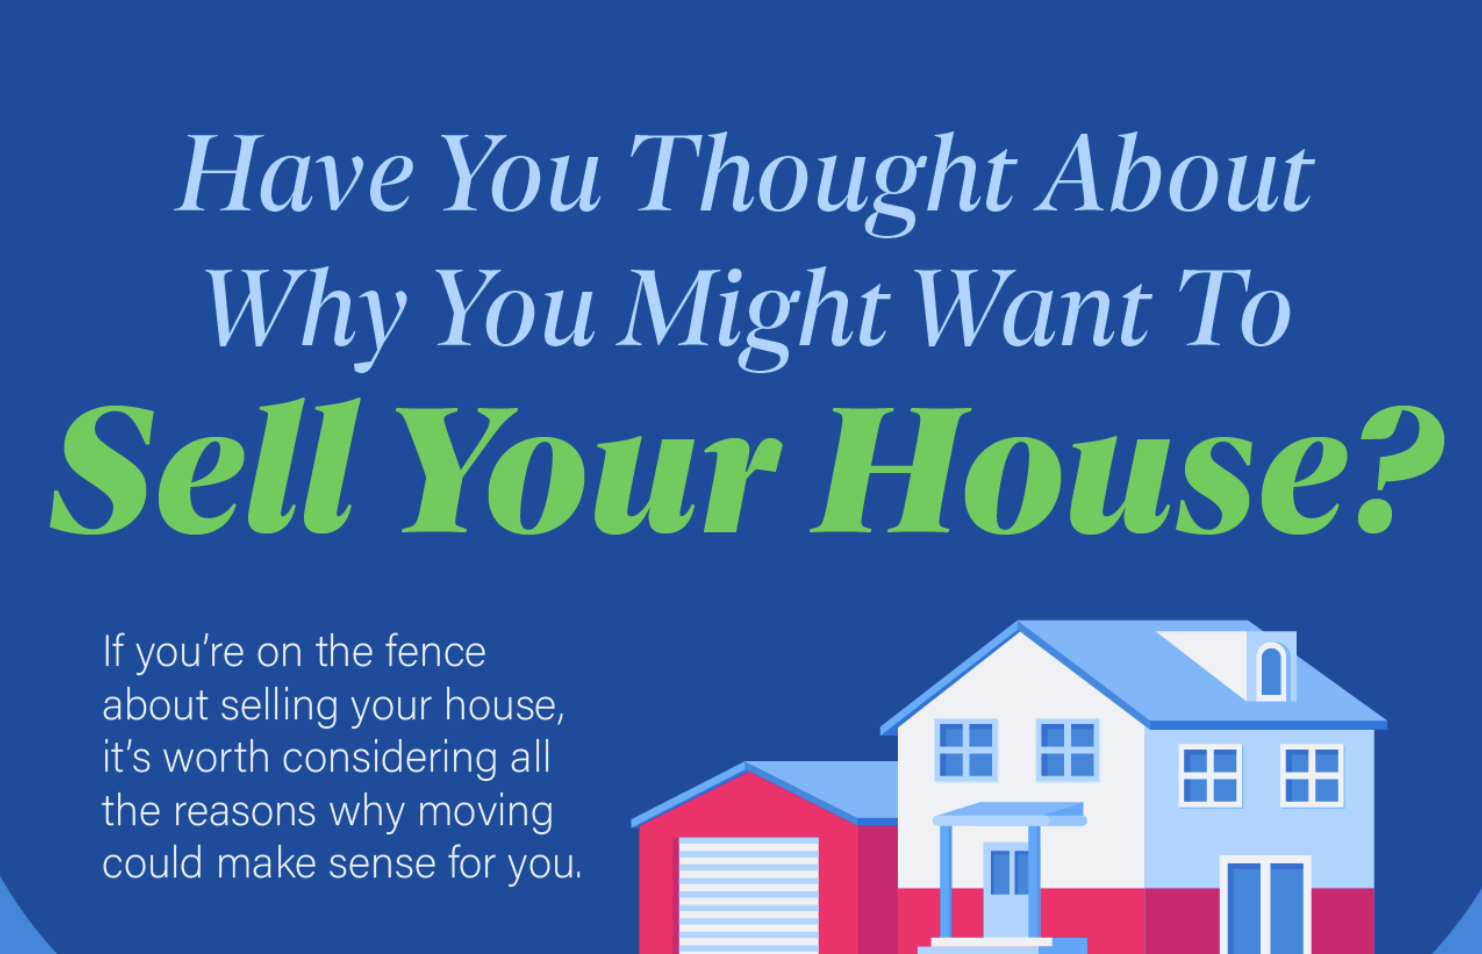 Have You Thought About Why You Might Want To Sell Your House? 